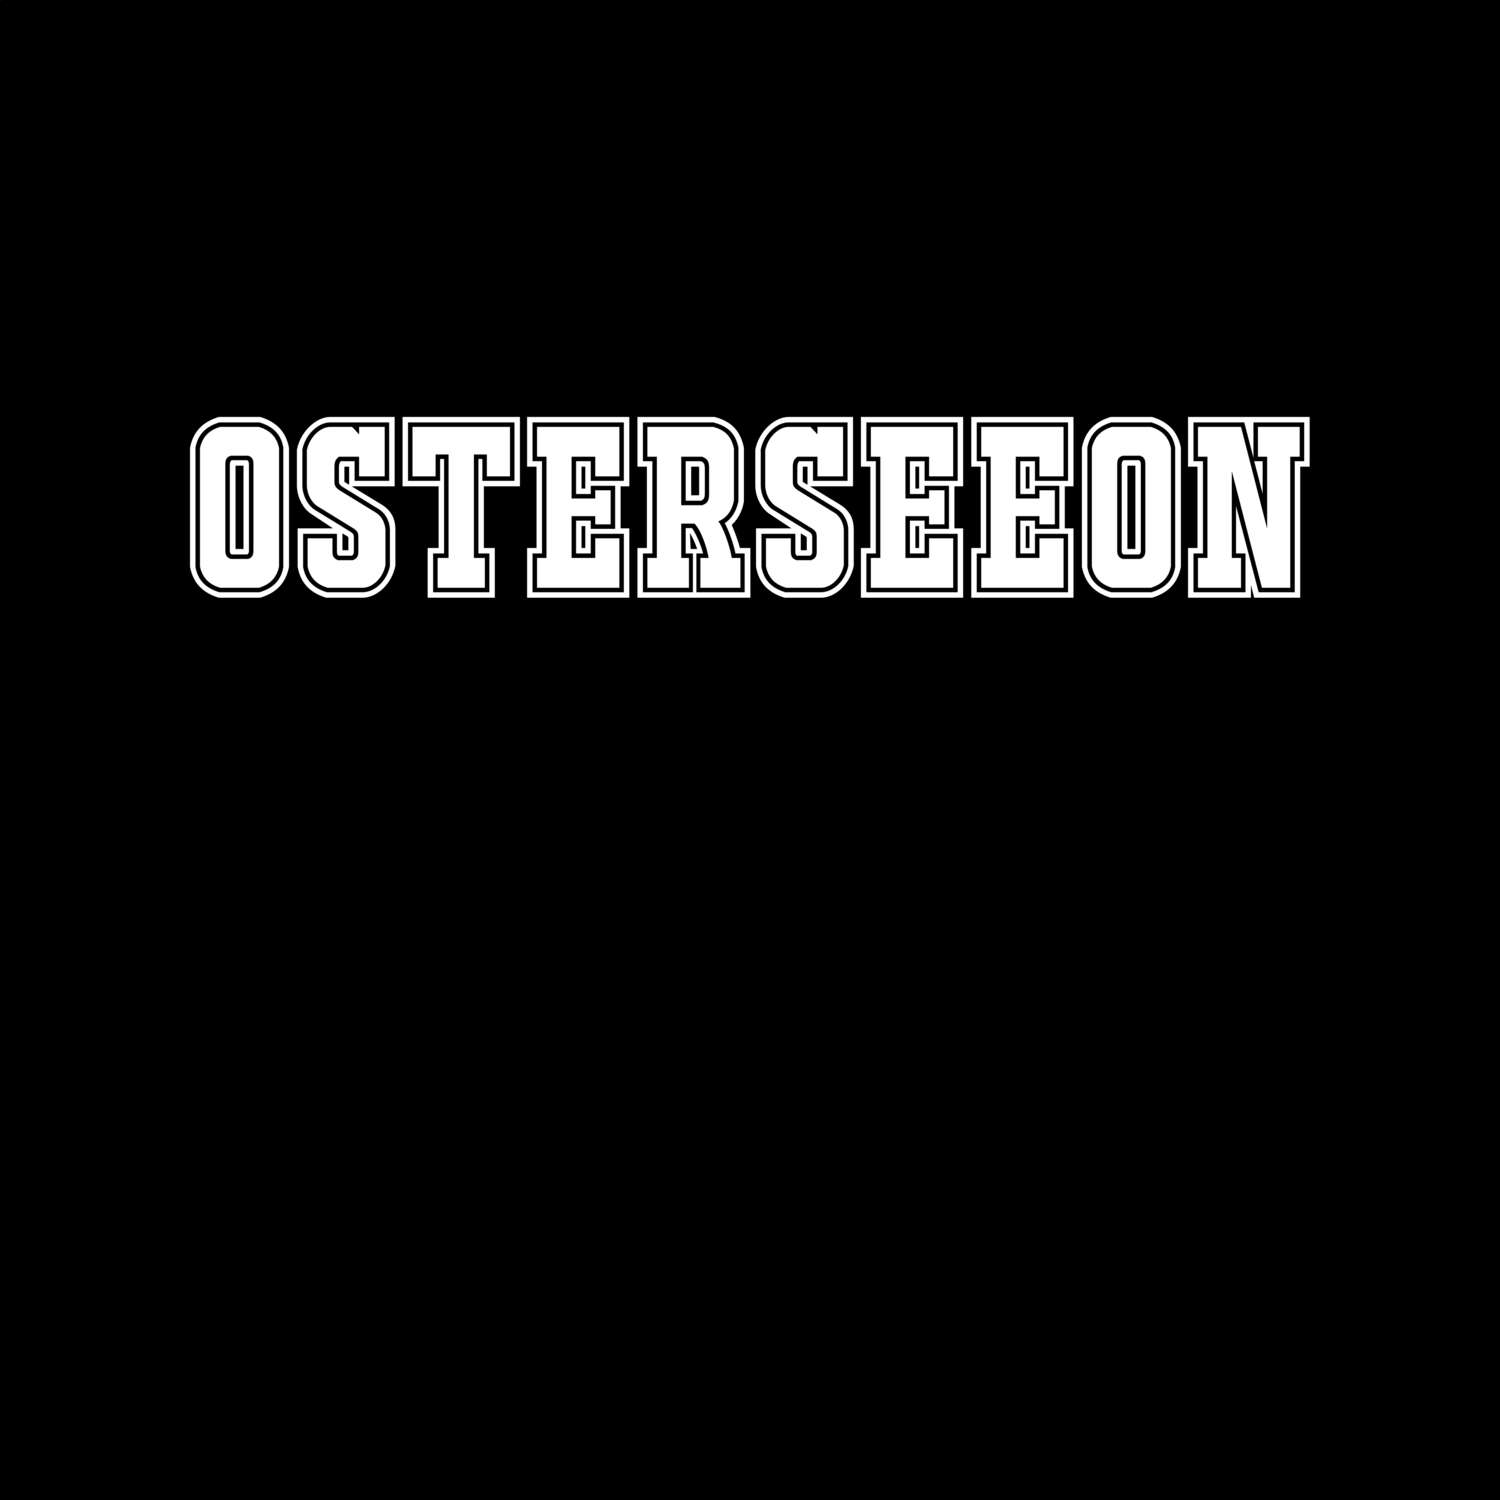 Osterseeon T-Shirt »Classic«